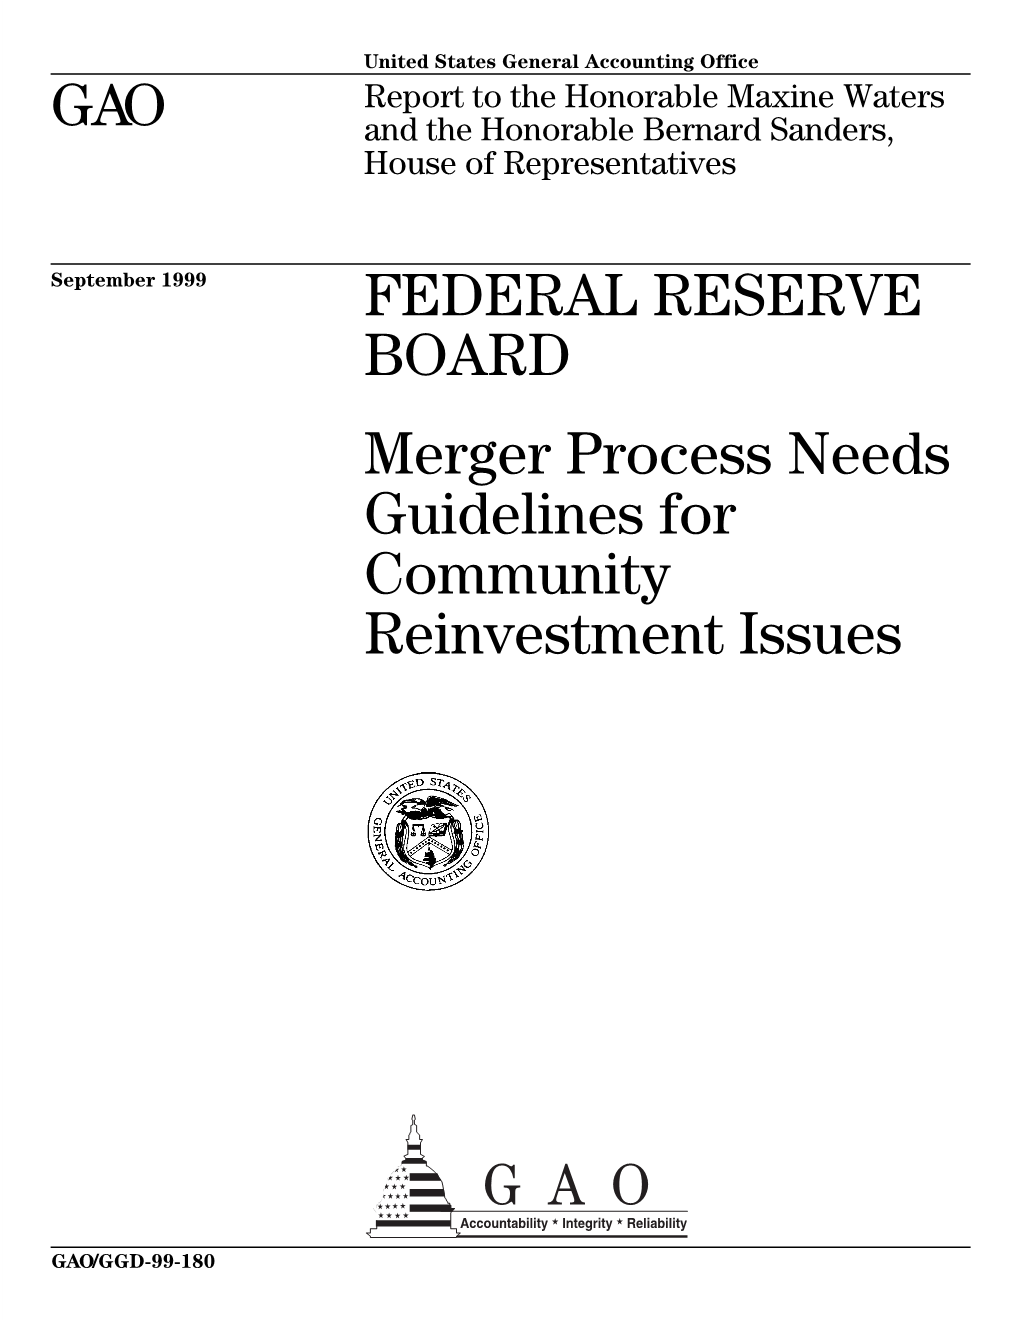 GGD-99-180 Federal Reserve Board: Merger Process Needs Guidelines